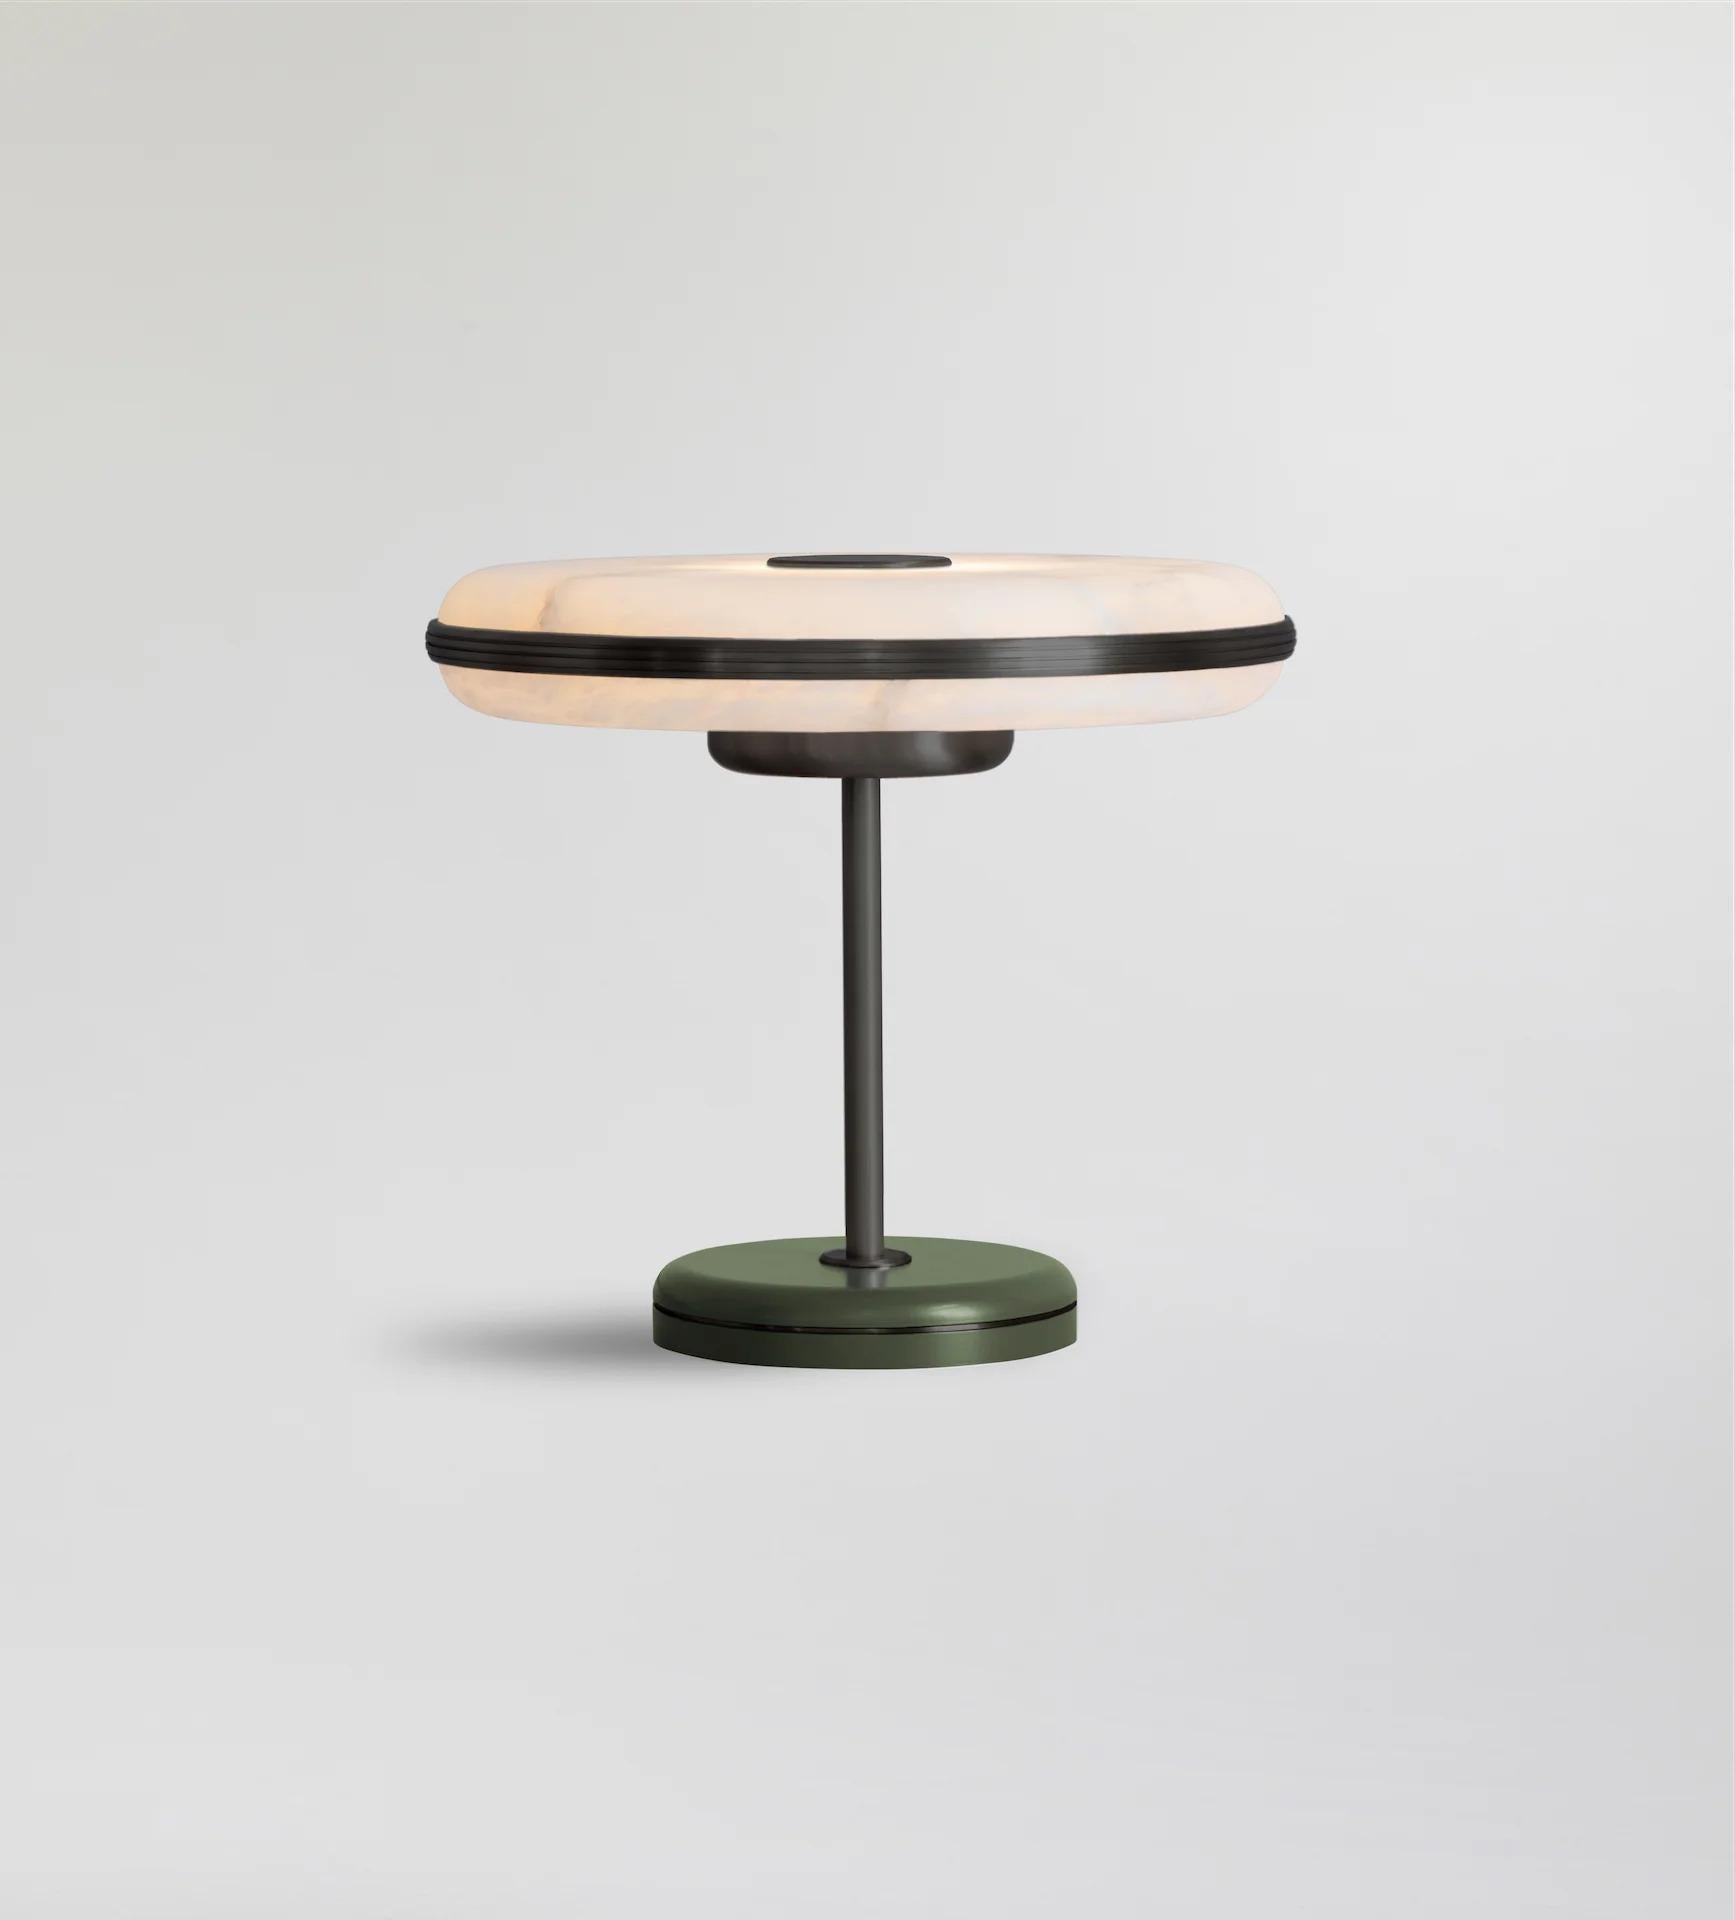 Beran Dark Bronze Large Table Lamp by Bert Frank
Dimensions: Ø 36 x H 32 cm.
Materials: Bronze and alabaster.
Base finish: Olive.

Available in two different sizes. Available in different finishes and materials. Please contact us. 

The natural